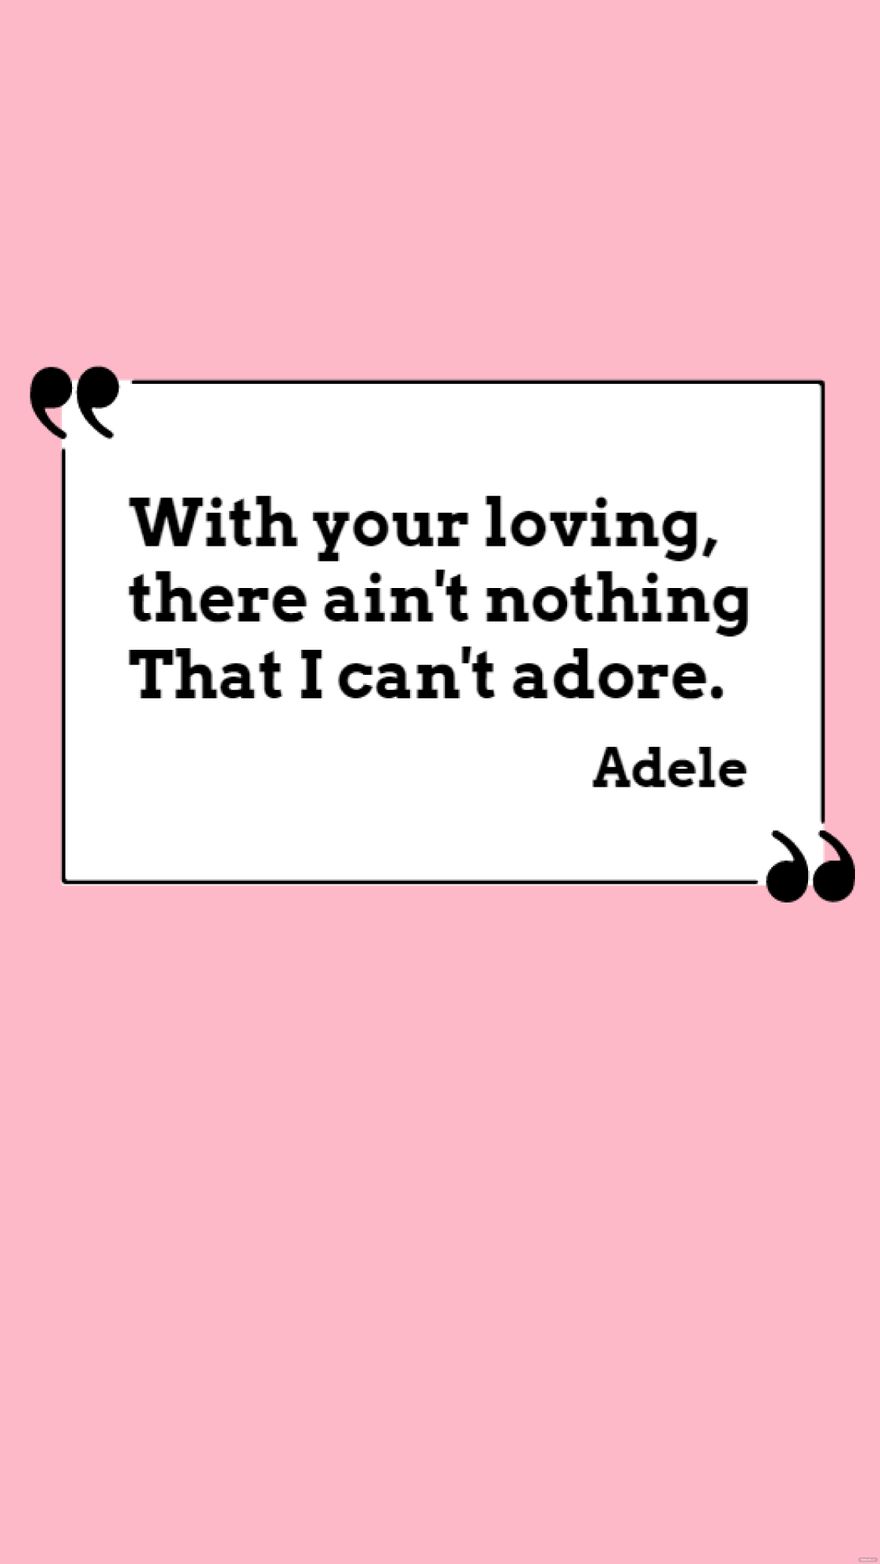 Free Adele - With your loving, there ain't nothing that I can't adore. in JPG